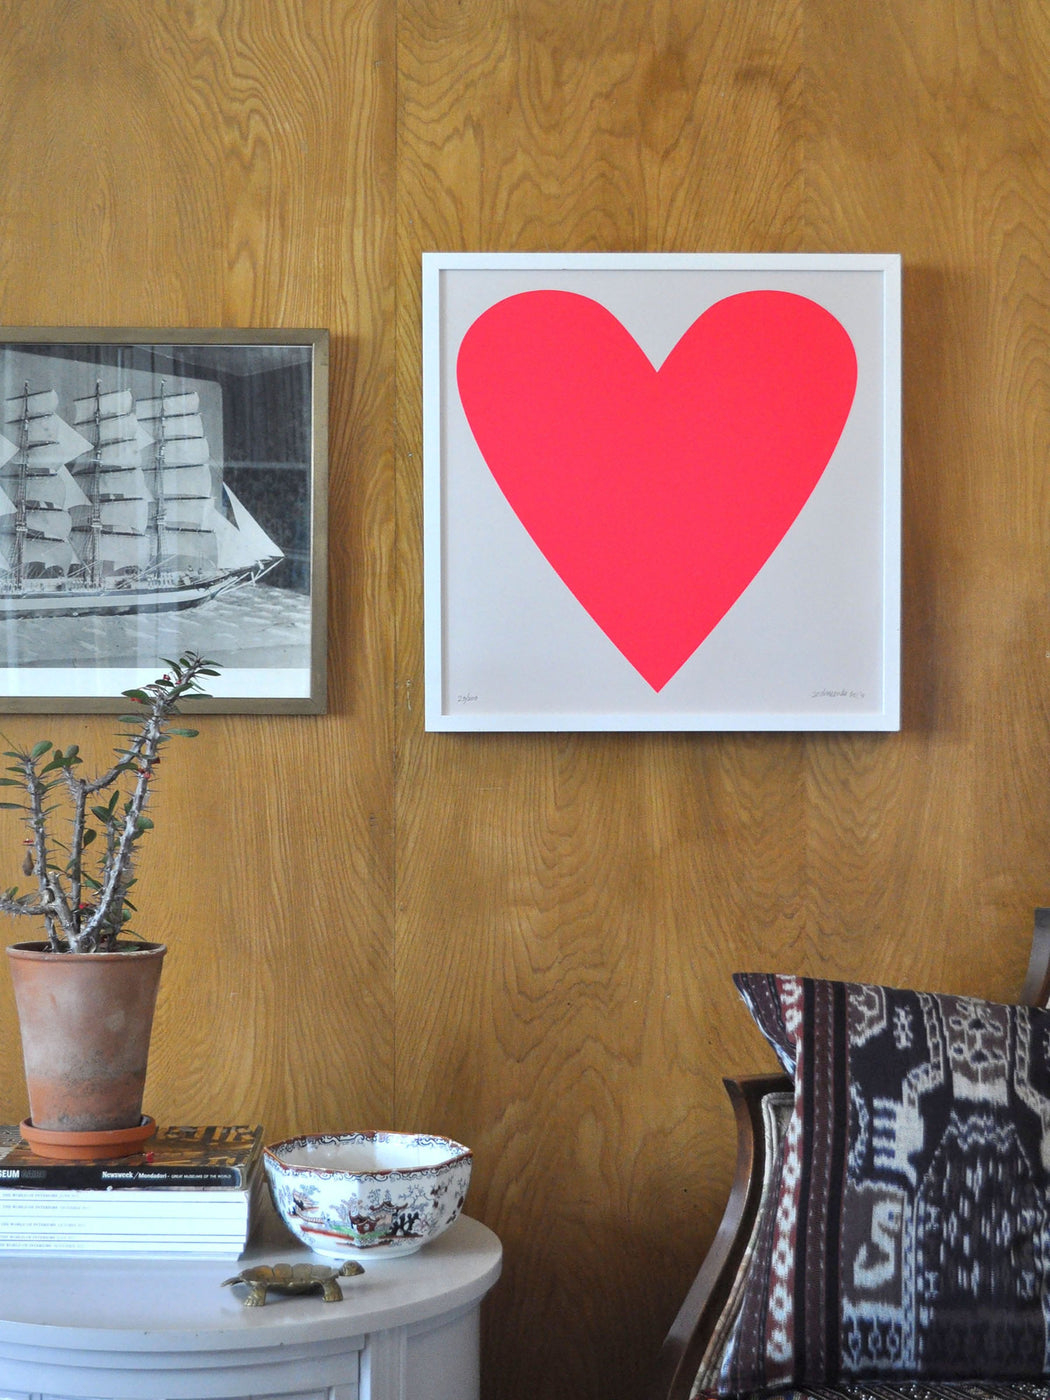 Art Print - Neon Pink Heart - For lovers everywhere